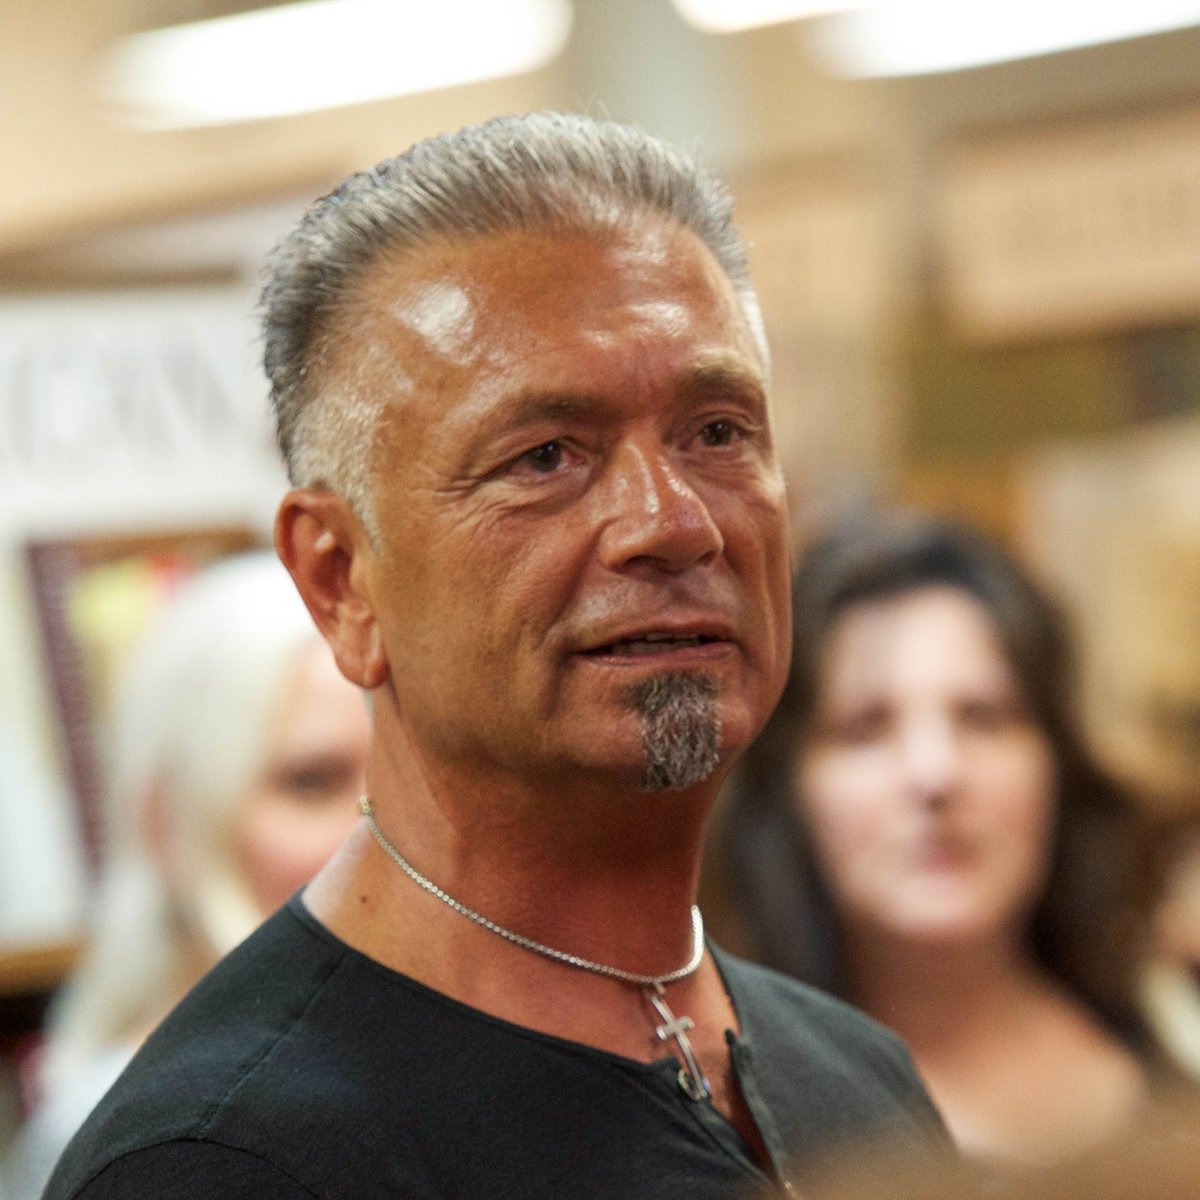 Larry Caputo attends the book signing for "There's More to Life Than This" at Book Revue on October 2, 2013